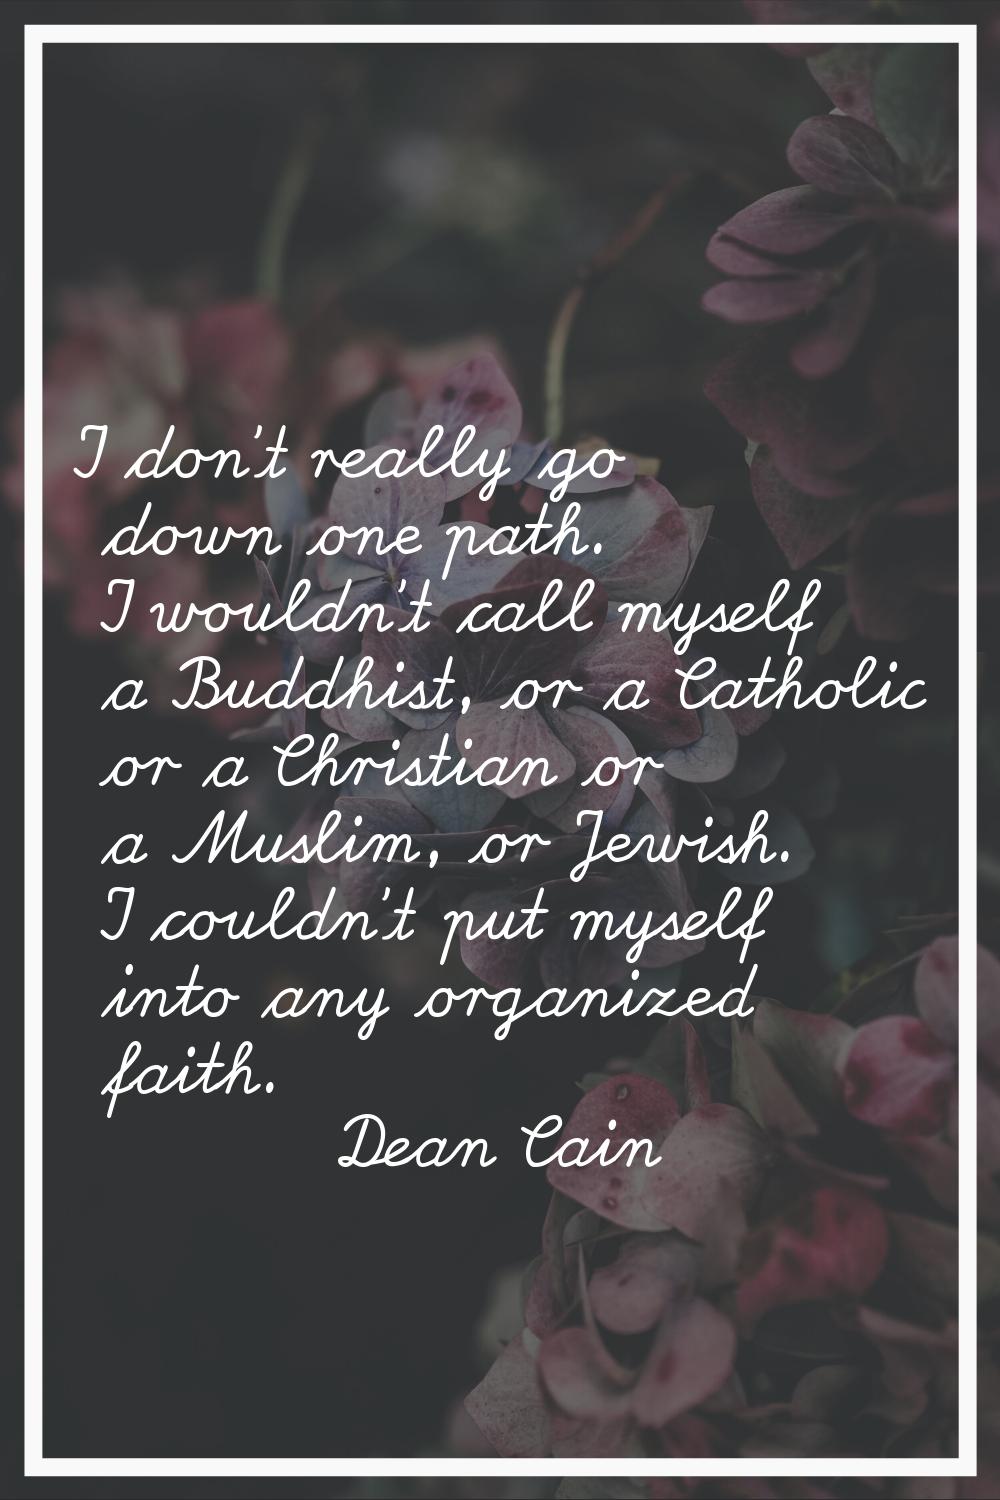 I don't really go down one path. I wouldn't call myself a Buddhist, or a Catholic or a Christian or